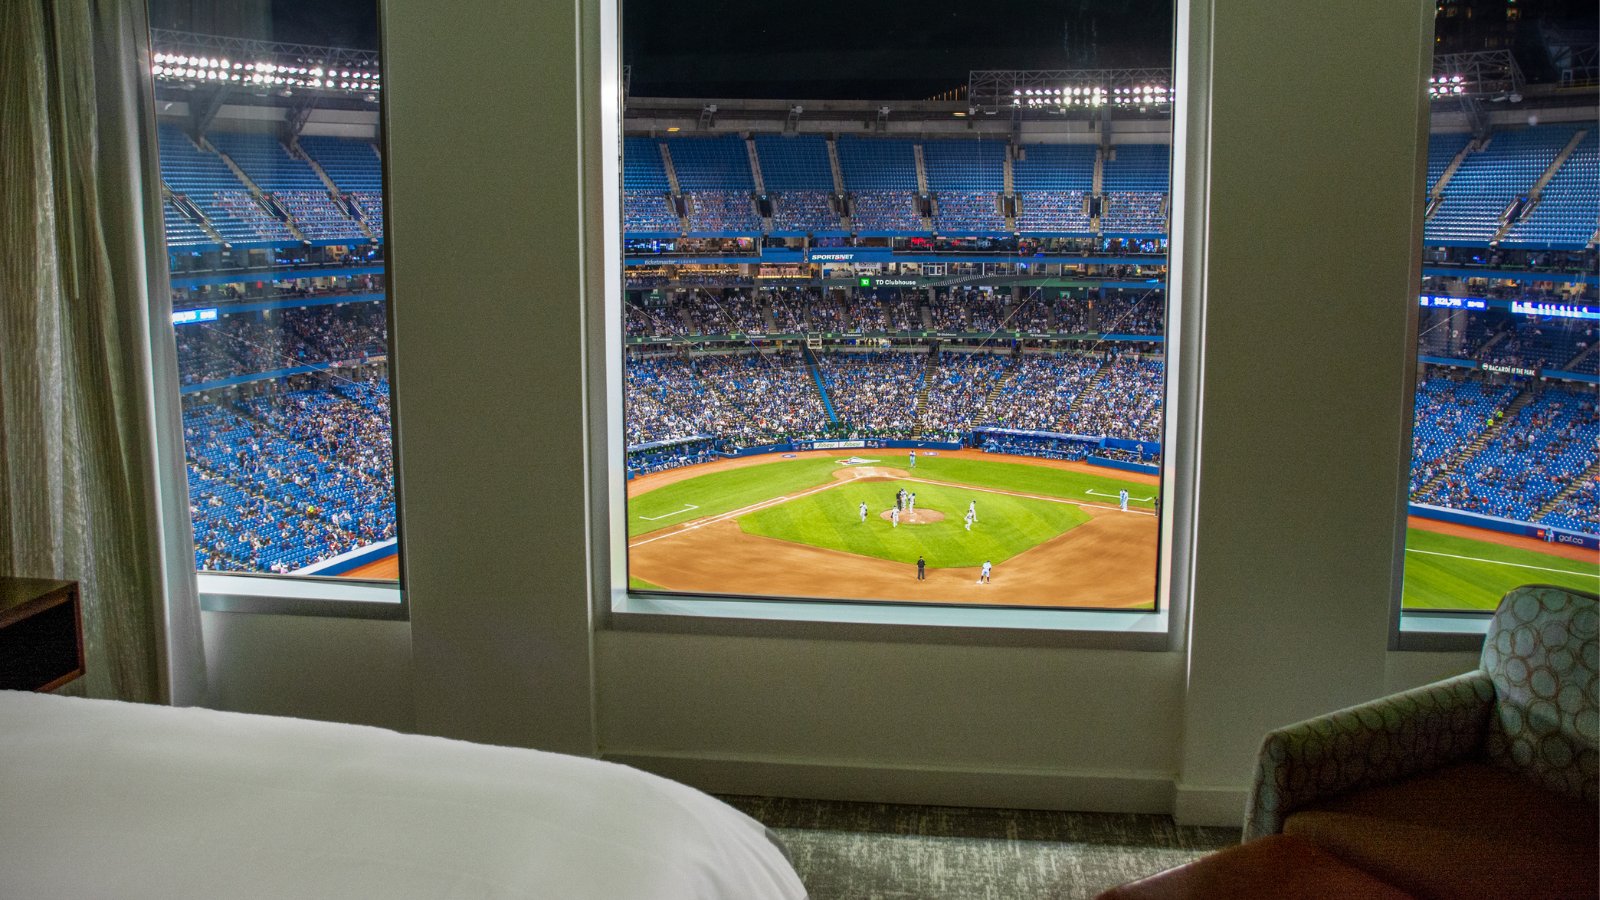 This hotel room has views of the Toronto Blue Jays' home field